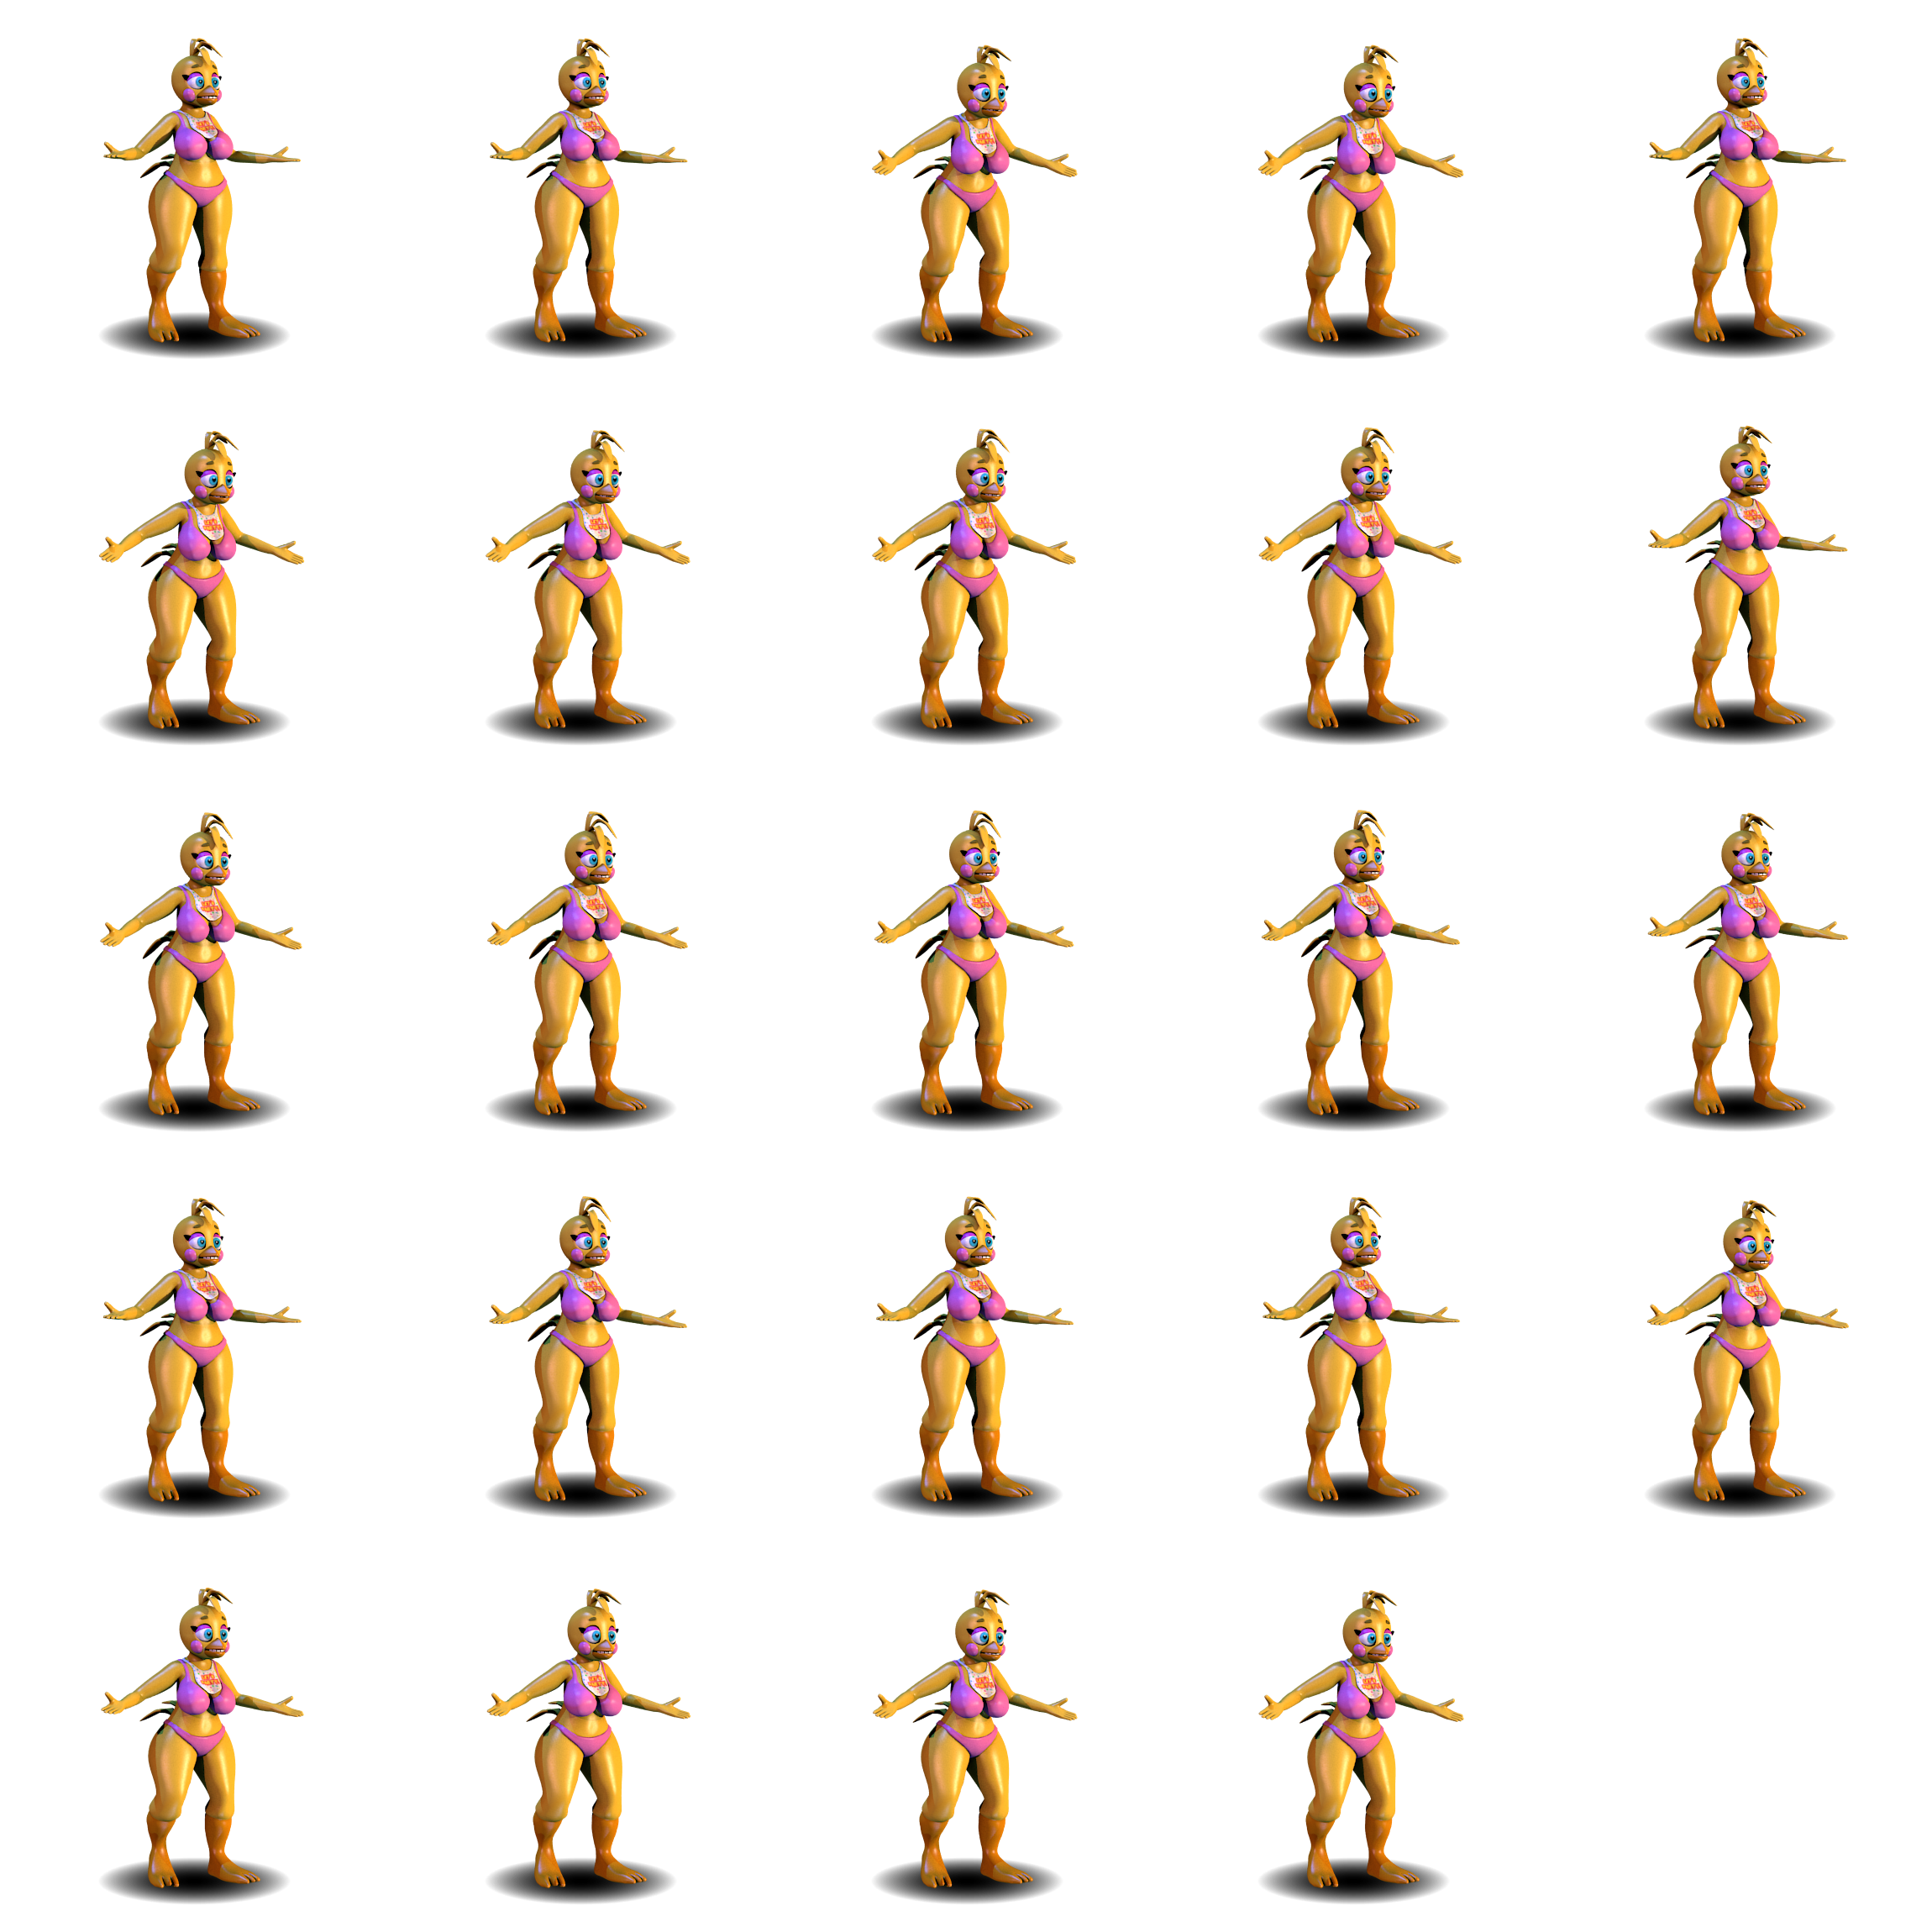 FNaF World: Adventure - Compact Chica